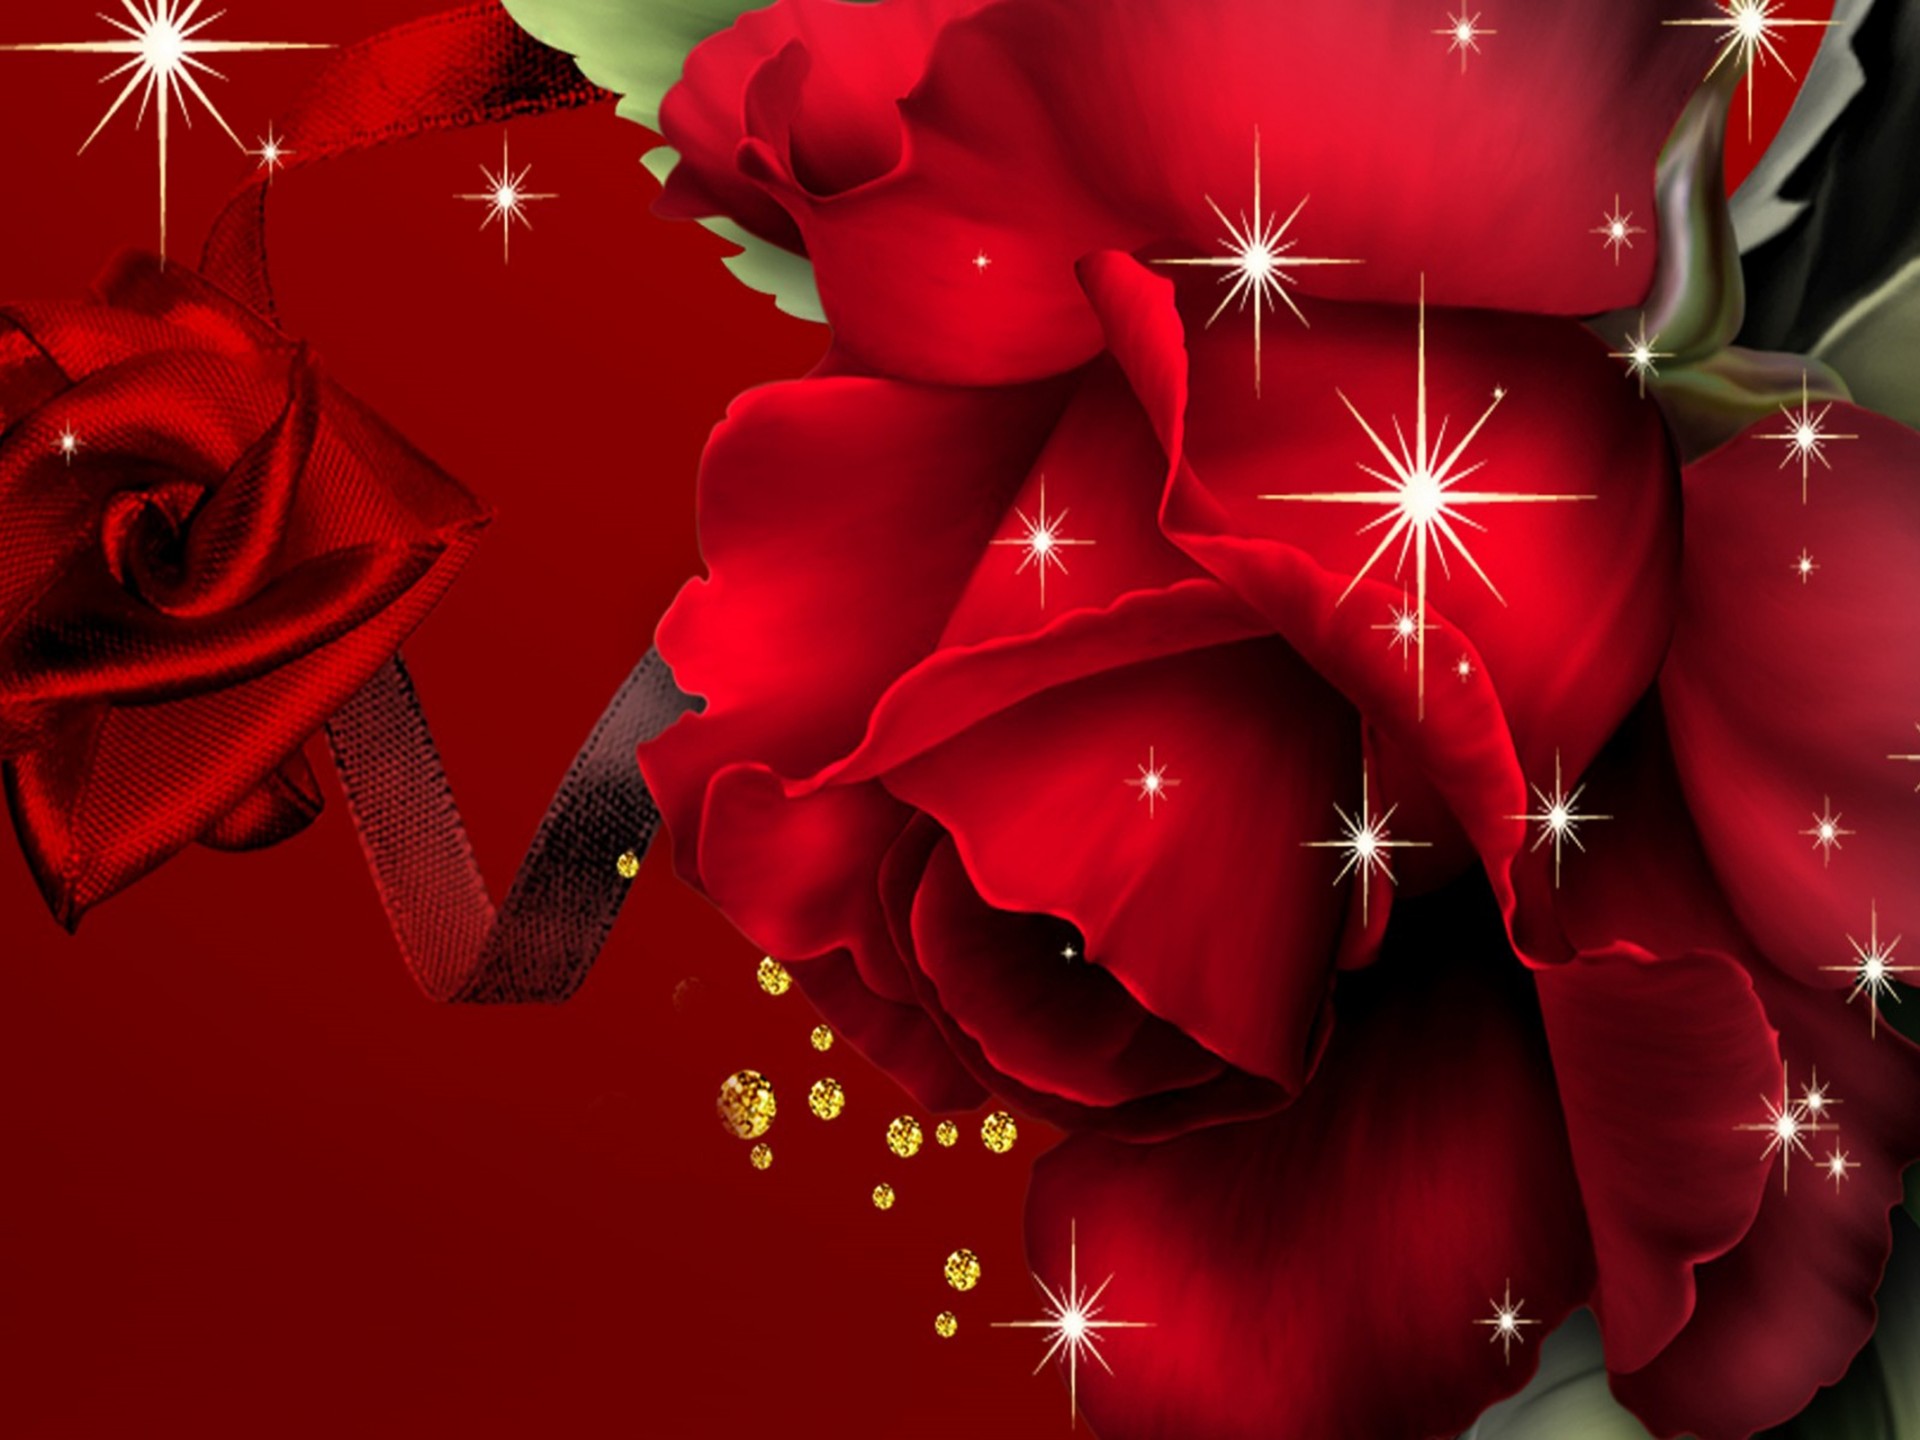 Black And Red Flower Wallpaper - HD Wallpaper 